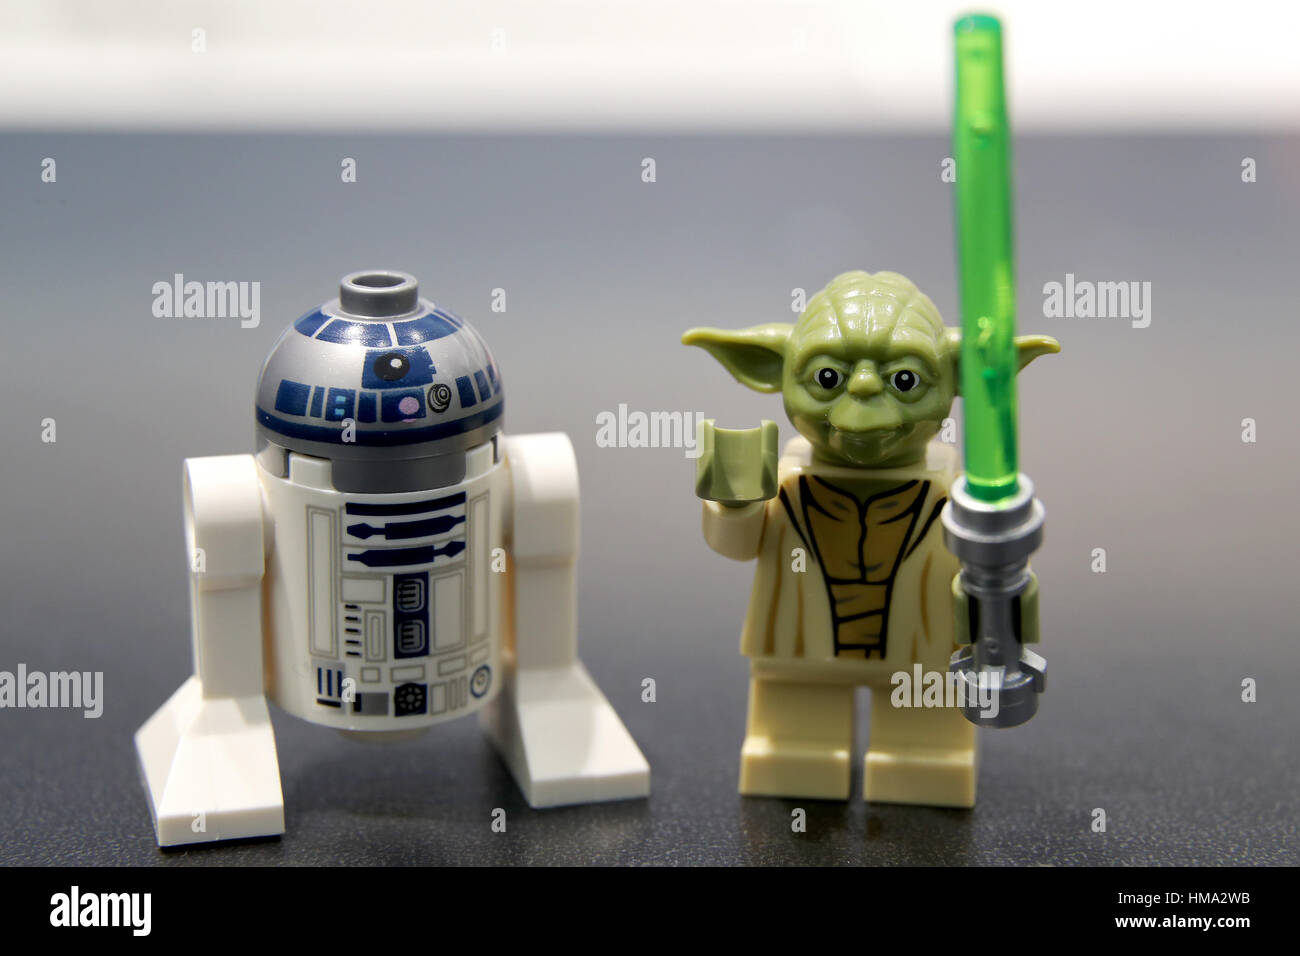 Nuremberg, Germany. 1st Feb, 2017. The Star Wars figurines R2-D2 (L) and Yoda can be seen at the stand of the manufacturer 'Lego' at the 68th international Toy fair in Nuremberg, Germany, 1 February 2017. The world's largest toy fair takes place during the 1 and the 6 February 2017. Photo: Daniel Karmann/dpa/Alamy Live News Stock Photo